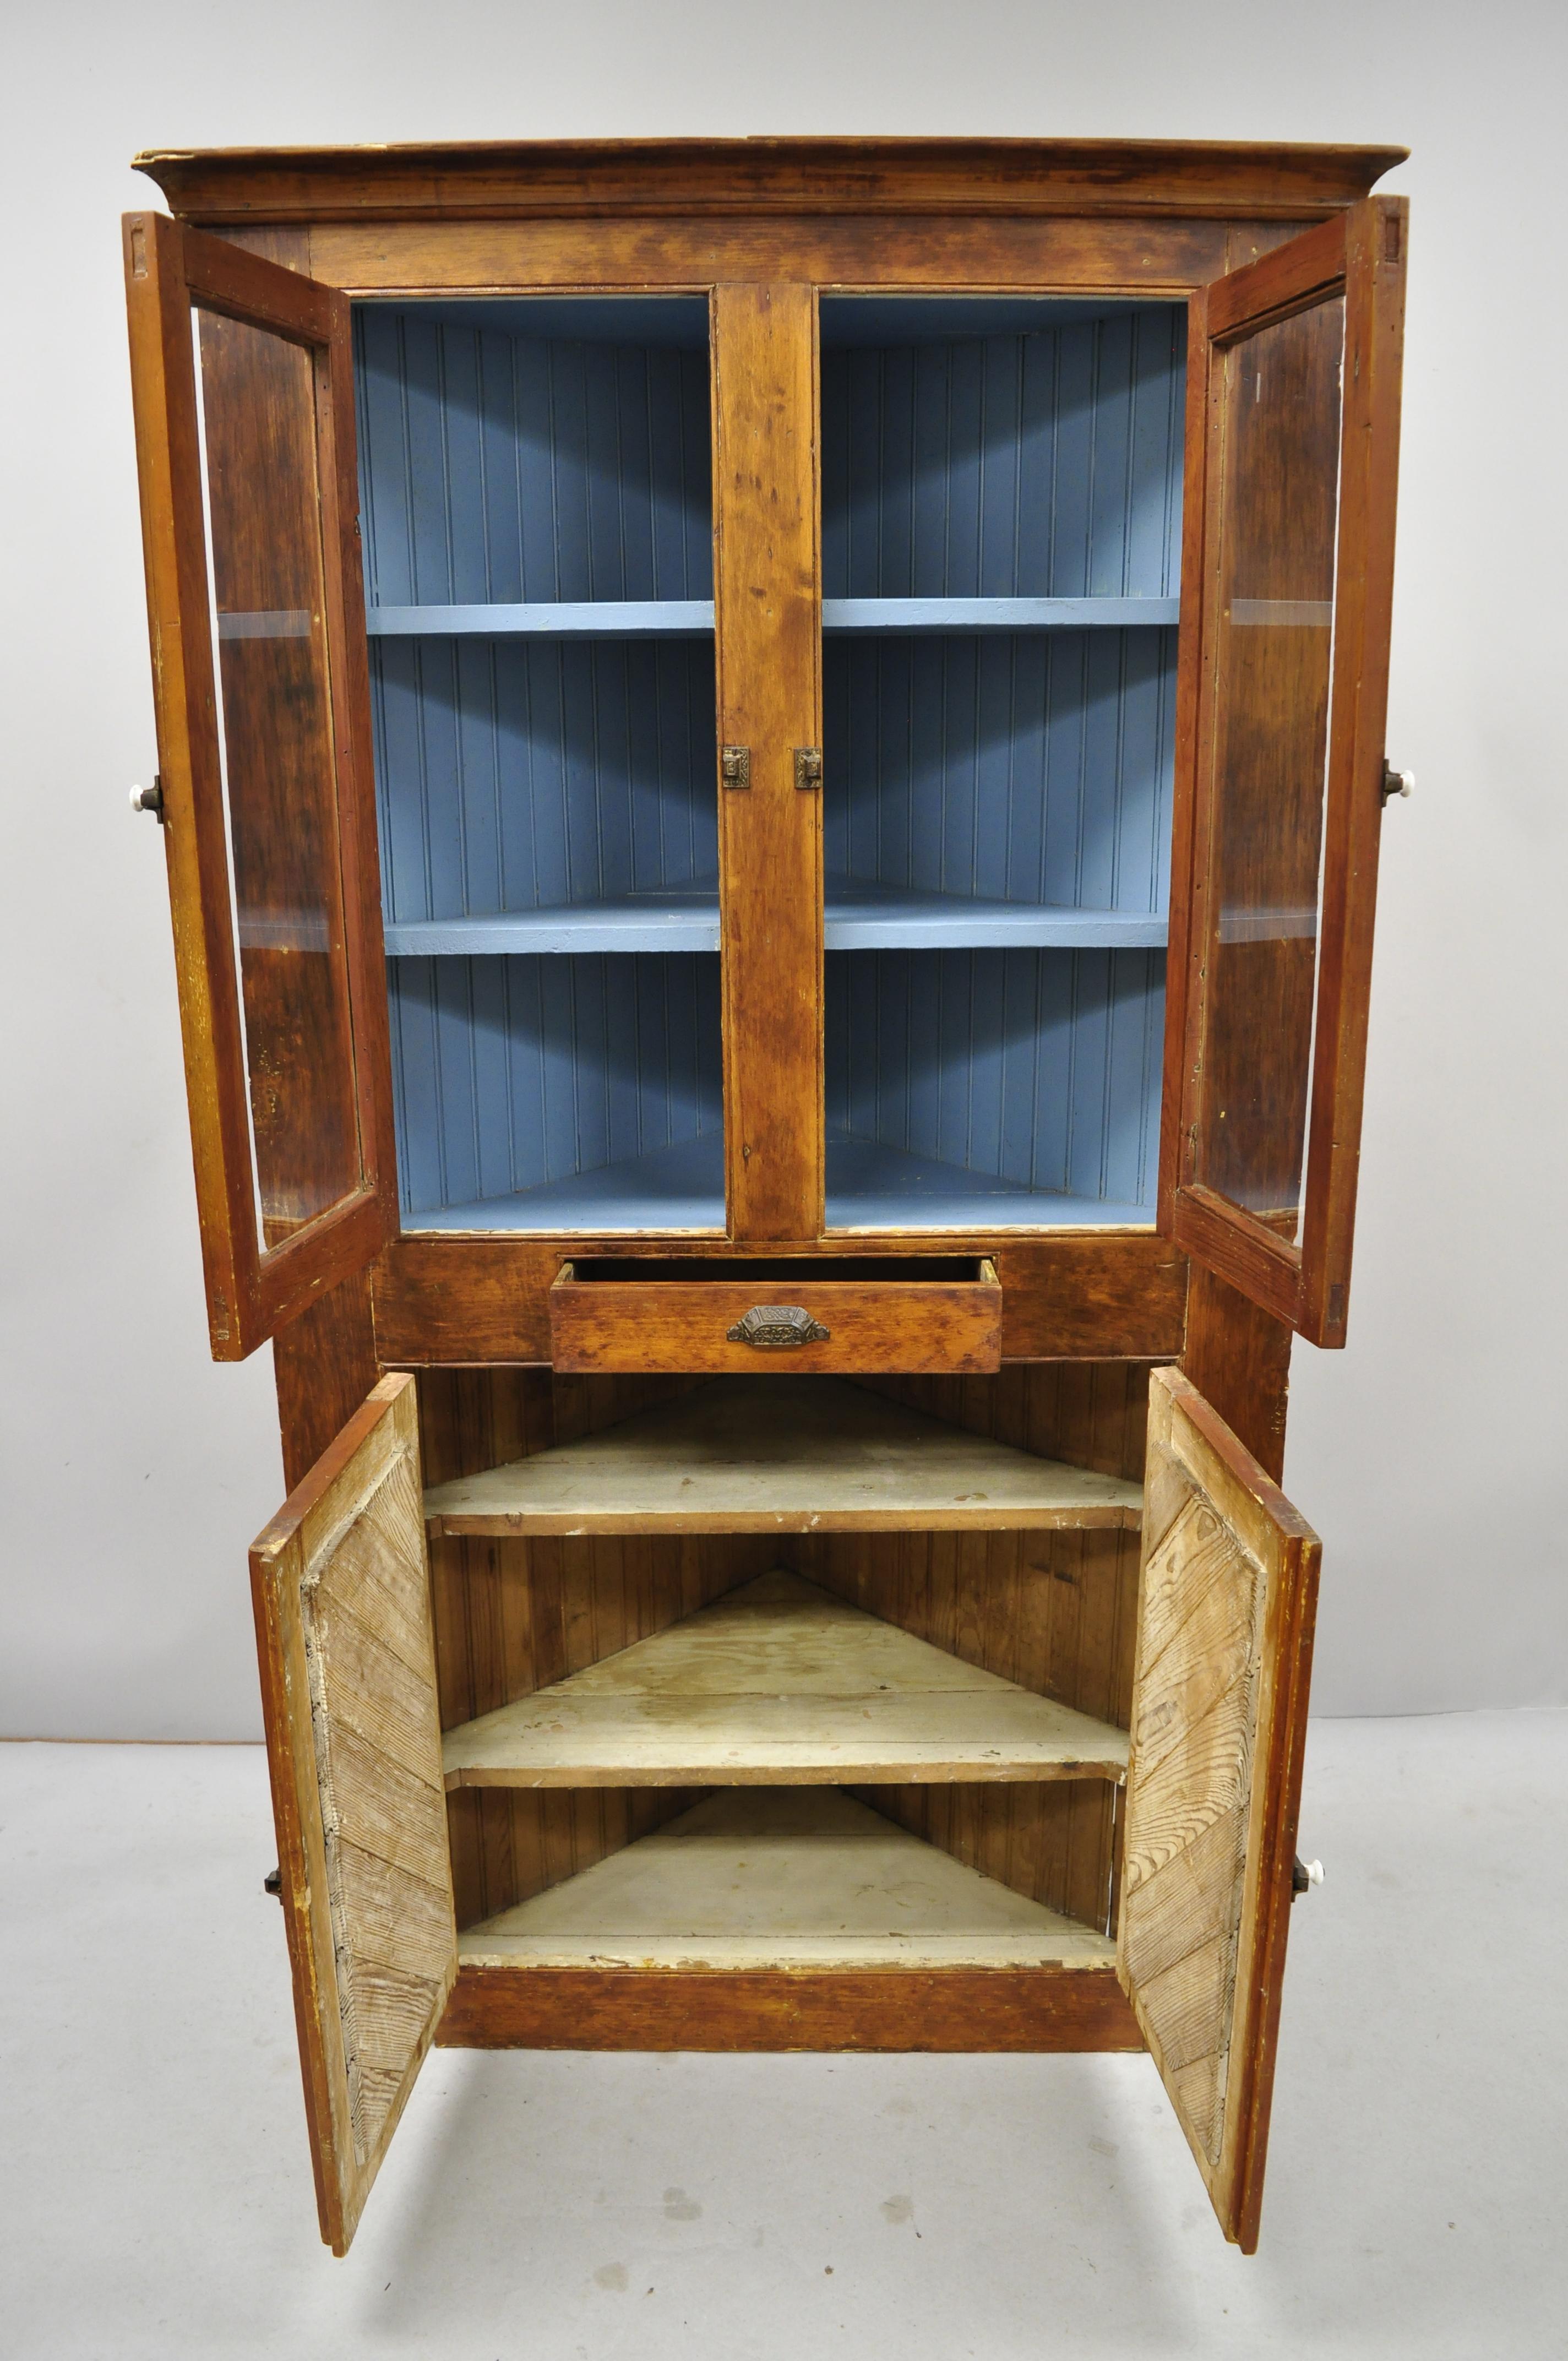 Antique pine wood Primitive Rustic corner China cabinet cupboard blue painted interior. Item includes a blue painted interior, upper glass doors, solid wood construction, beautiful wood grain, 4 swing doors, 1 drawer, very nice antique item, quality